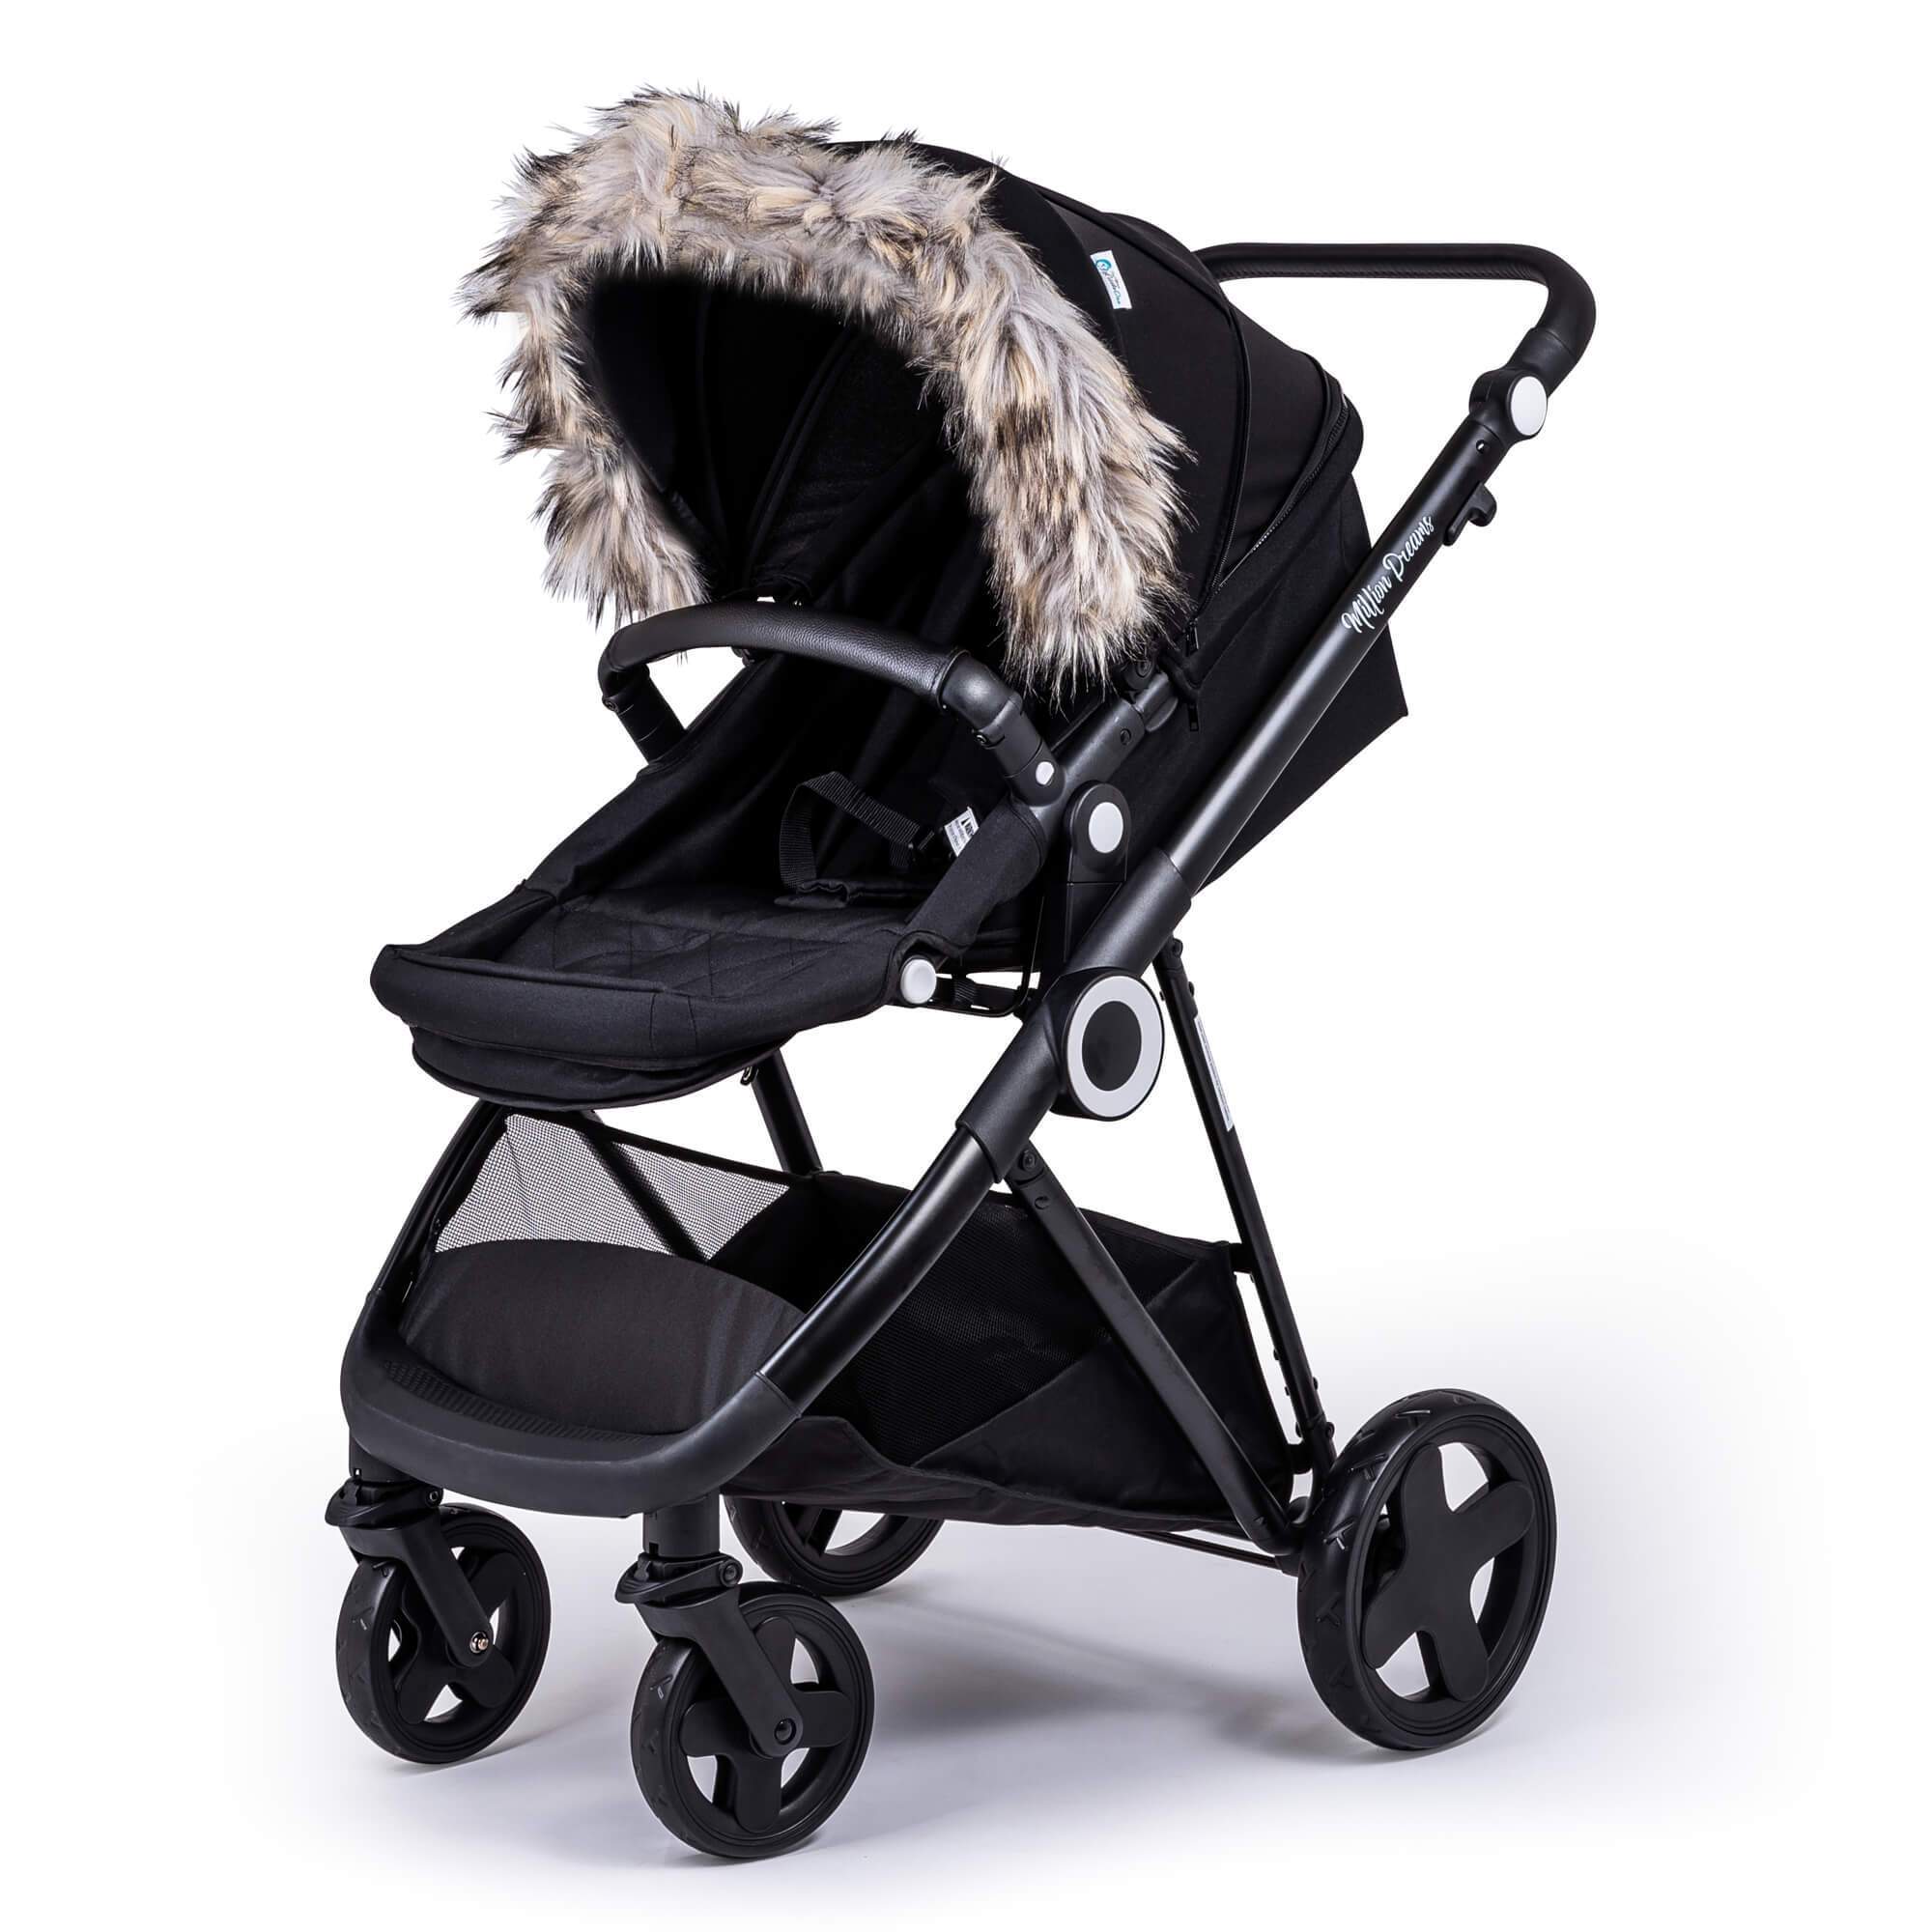 Pram Fur Hood Trim Attachment for Pushchair Compatible with My Babiie - Light Grey / Fits All Models | For Your Little One